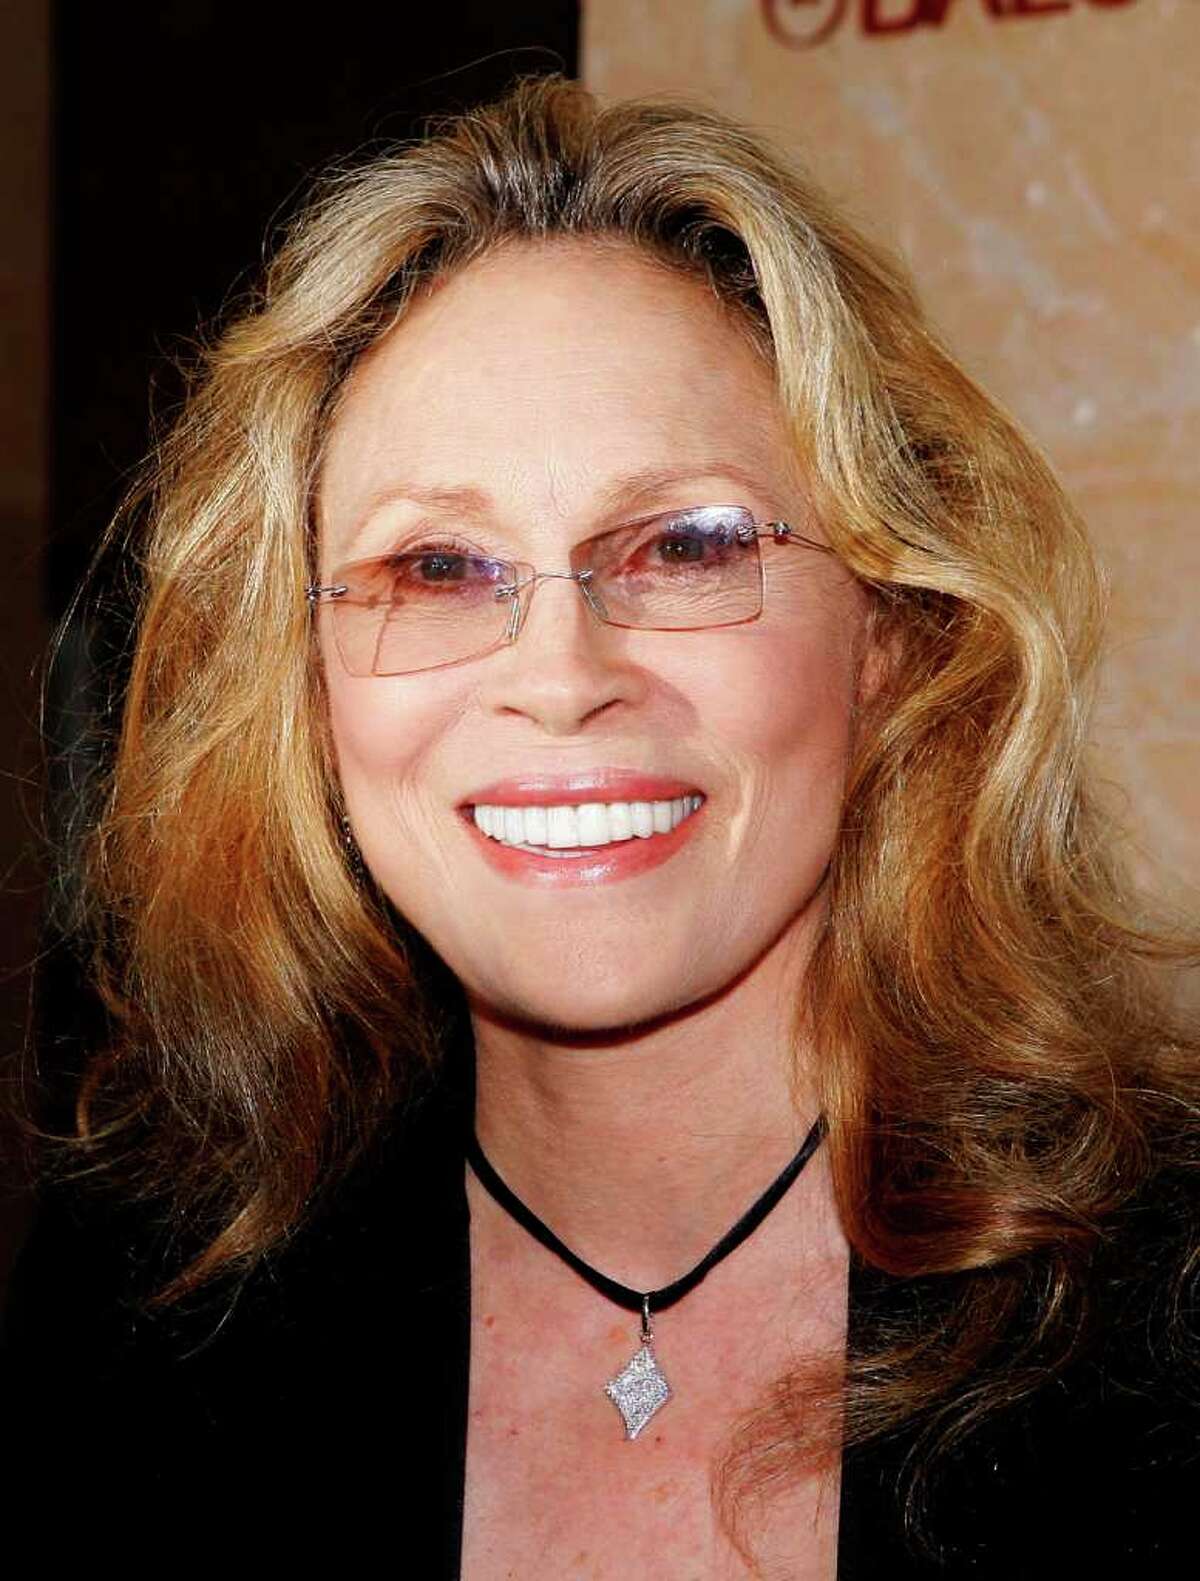 Actress Faye Dunaway, seen here at the The Public Theater and Labyrinth Theater's opening night production of 'Othello' at the Jack H. Skirball Center for the Performing Arts in 2009 in New York City, is just one of the stars in Sidney Lumet's 1976 film 'Network.' This Academy Award-winning film kicks off Westport Library's “Overcoat Film Series,” which begins Thursday, Jan. 6. (Photo by Donna Ward/Getty Images)